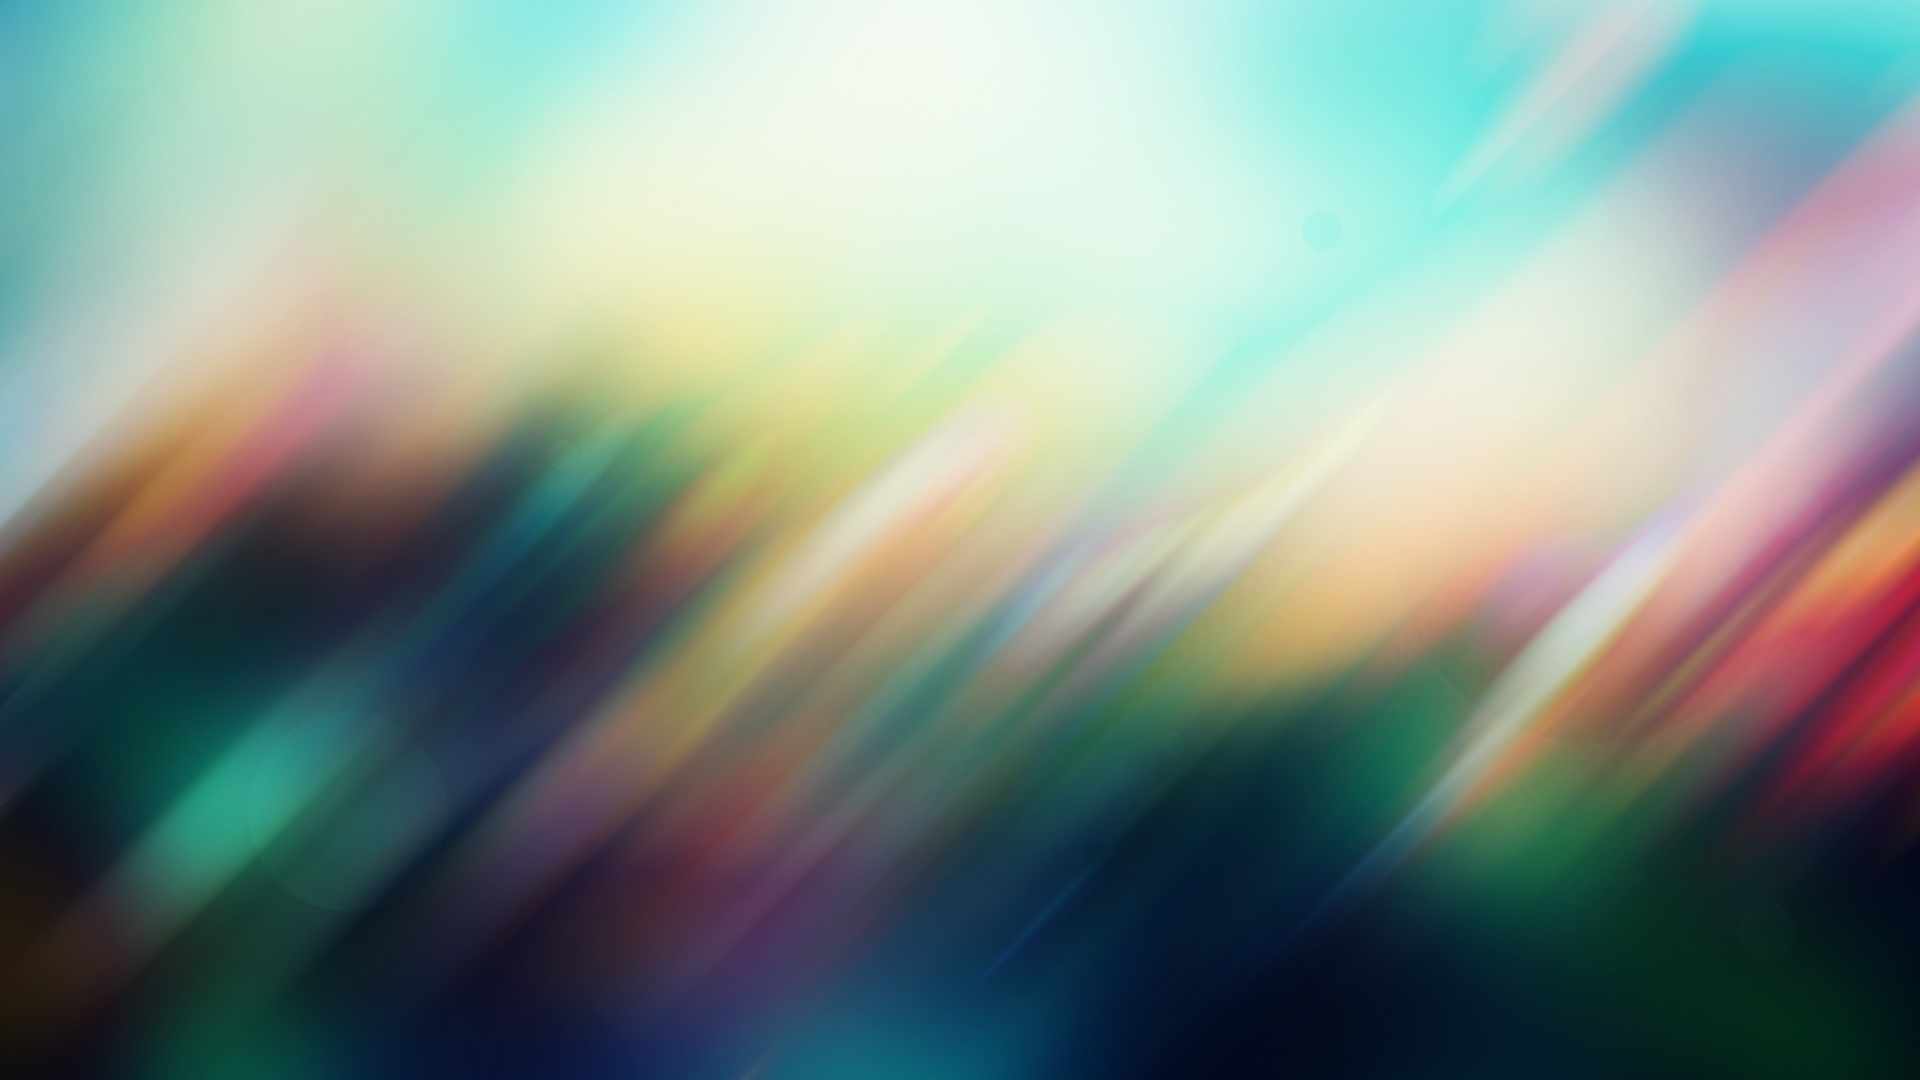 General 1920x1080 abstract colorful digital art blurred